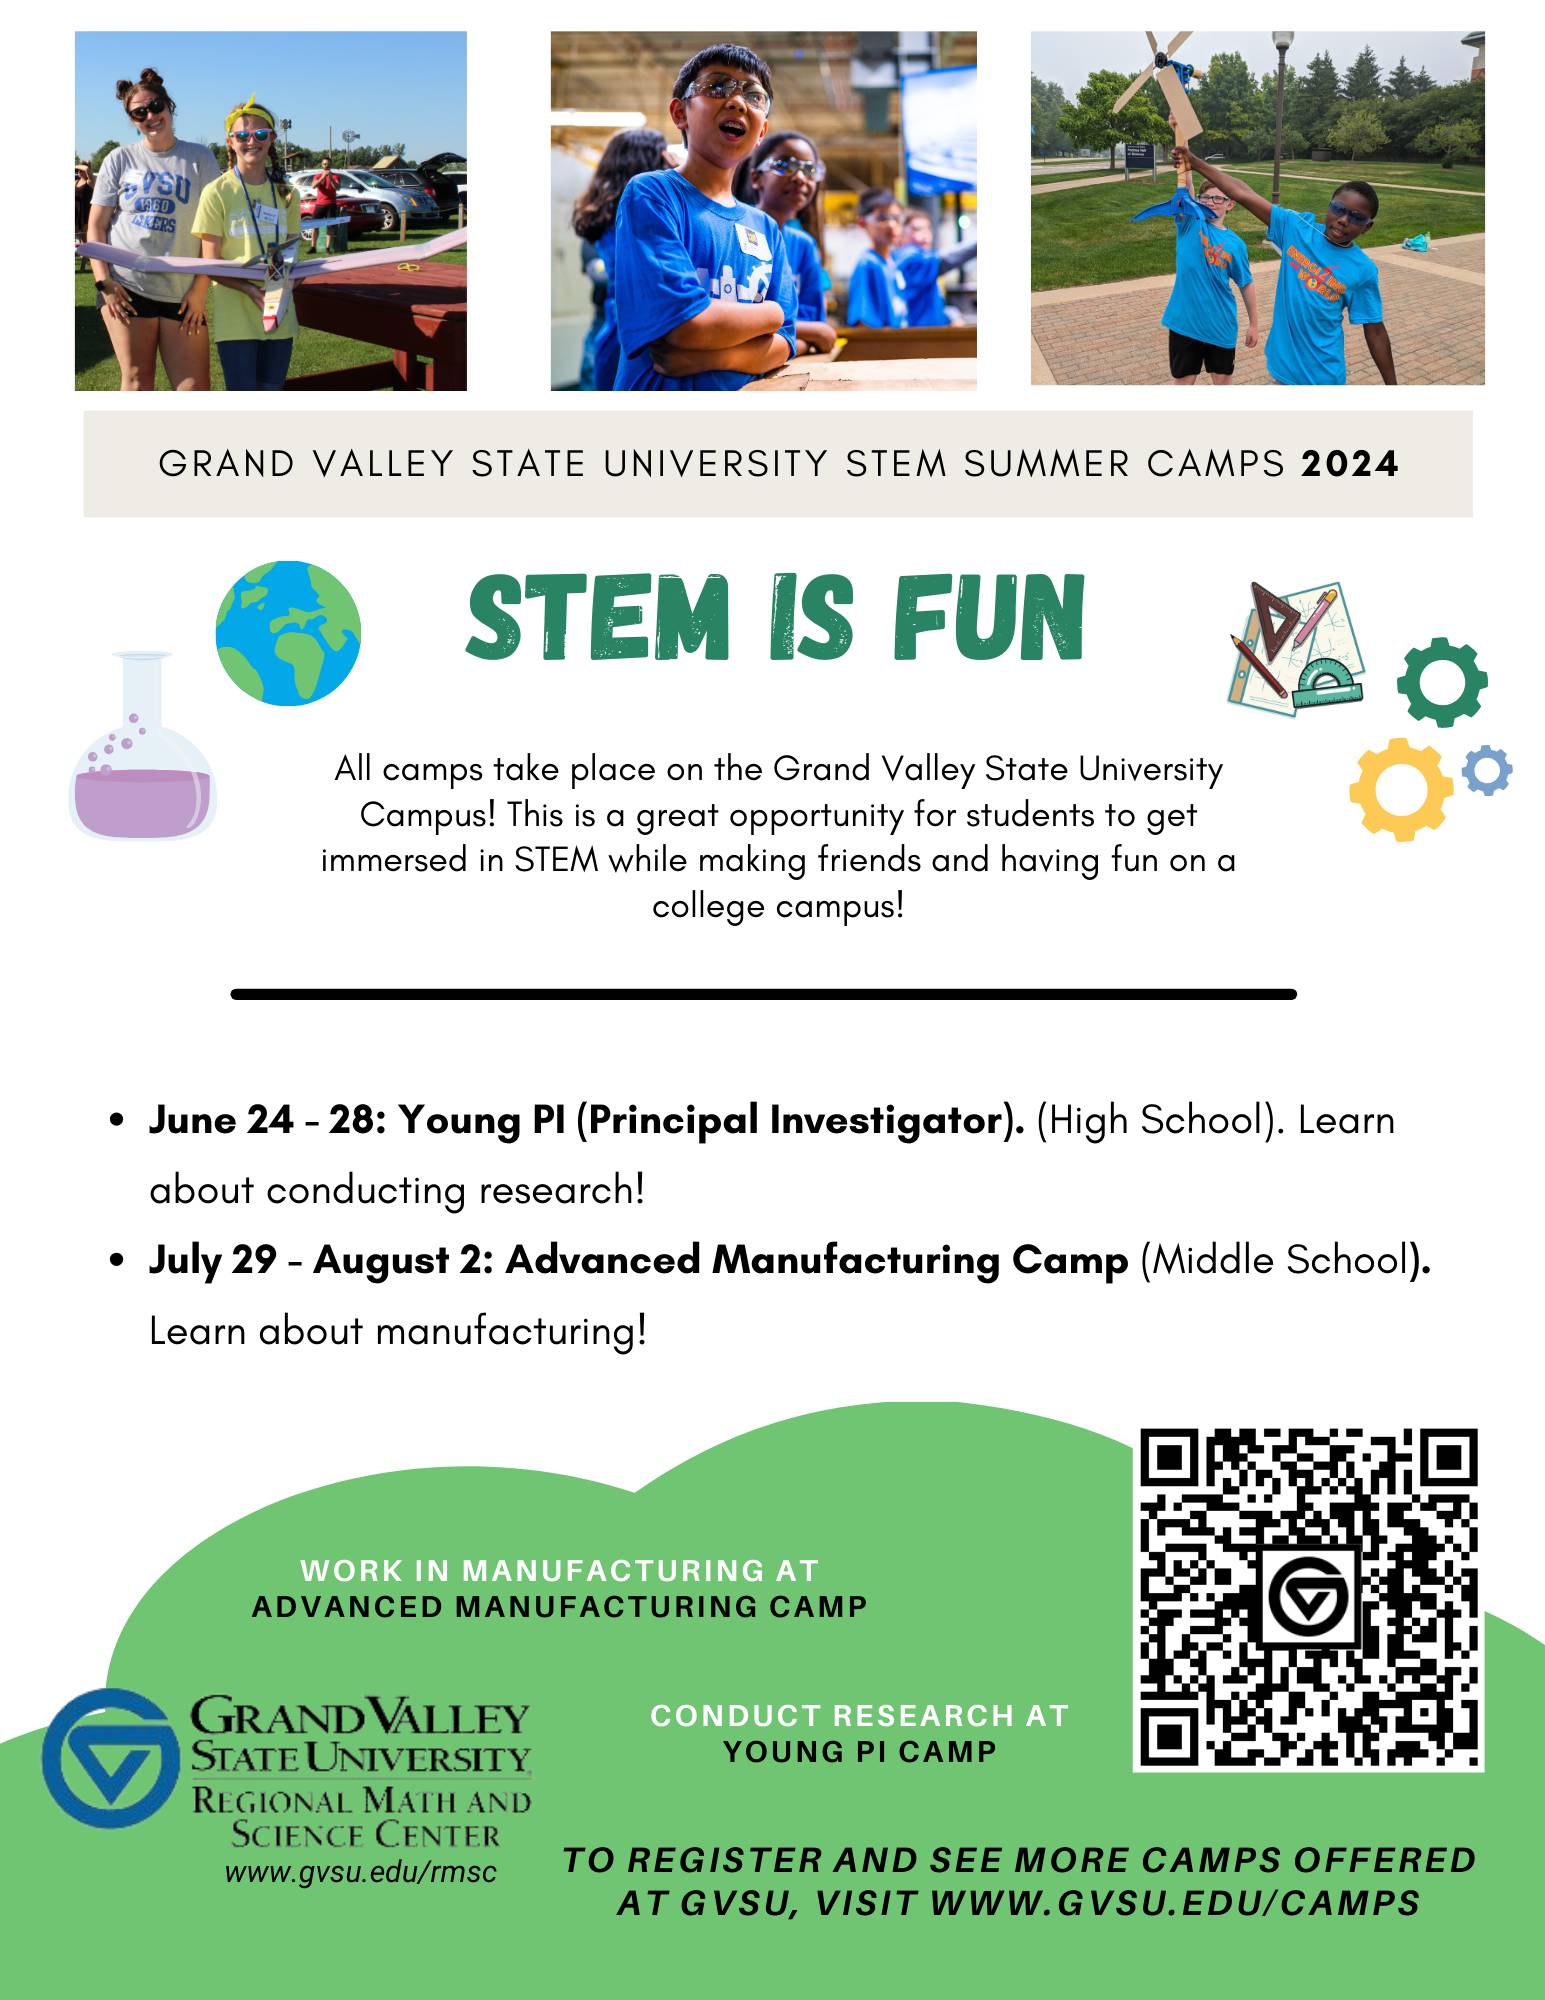 STEM is Fun - Young PIs June 24th through the 28th and Advanced Manufacturing Camp June 29th through August 2nd.